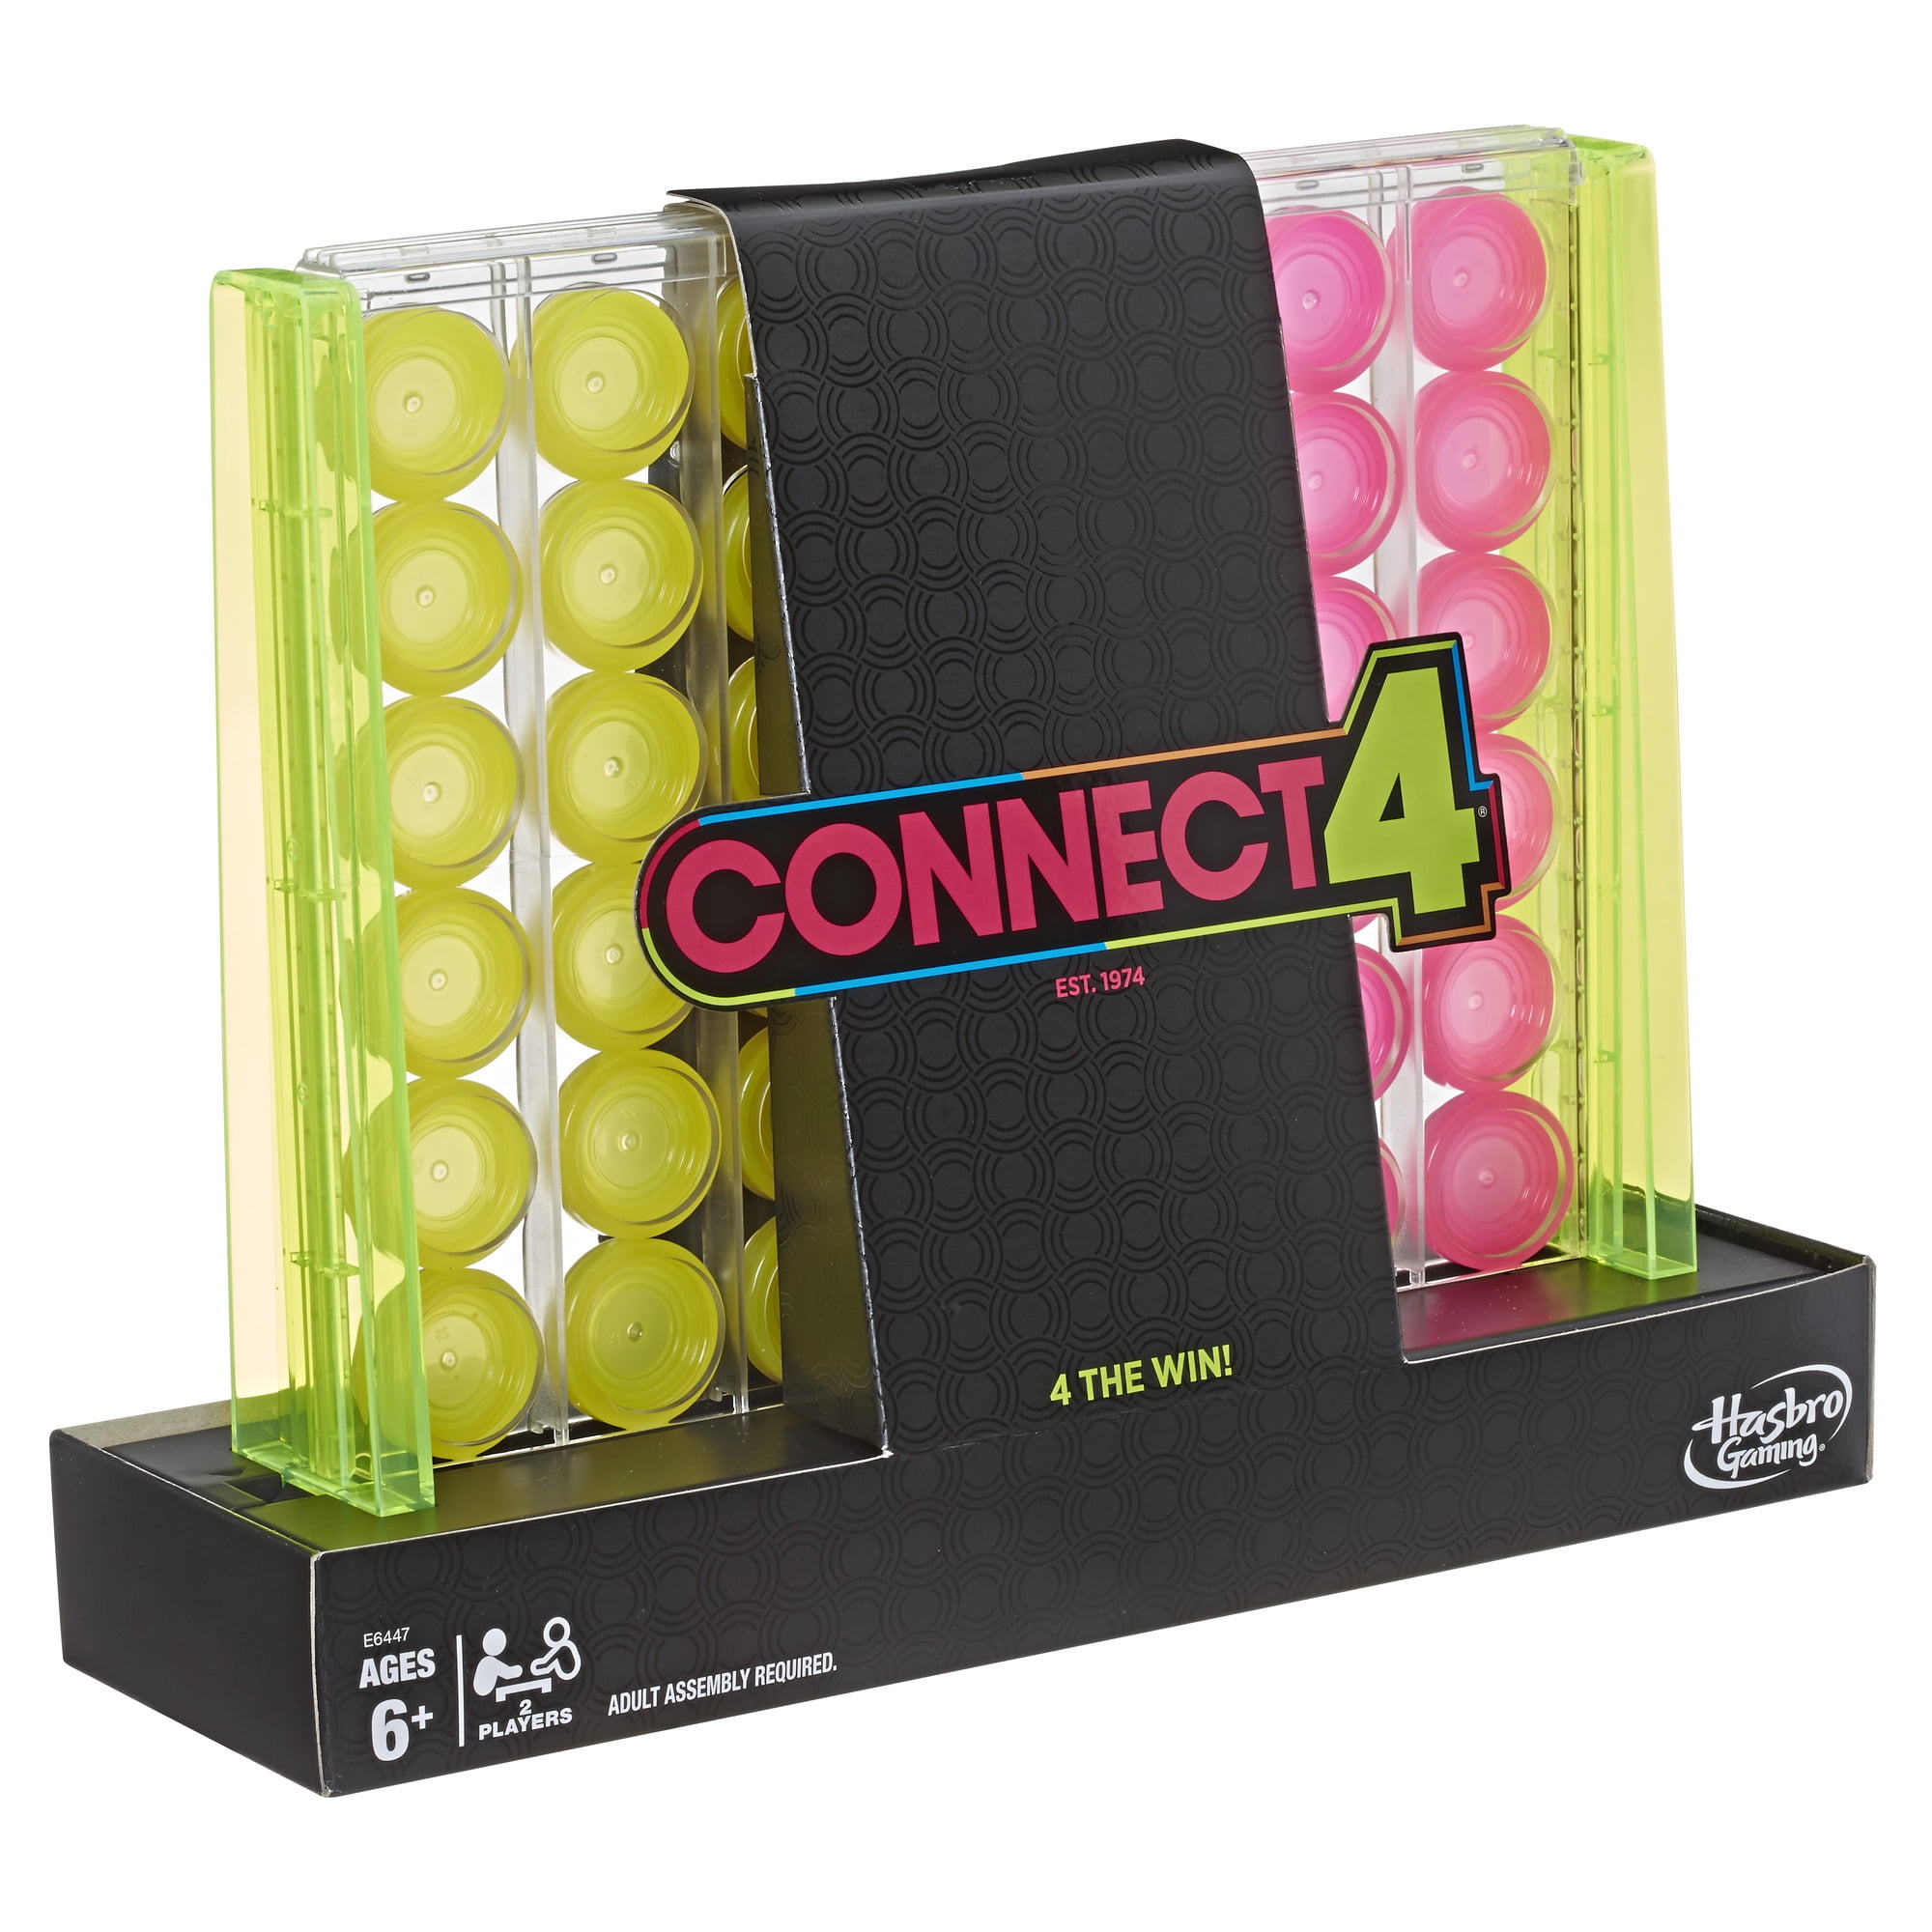 Connect 4 Neon Pop Board Game 2018 Hasbro Gaming 2 Players for sale online 